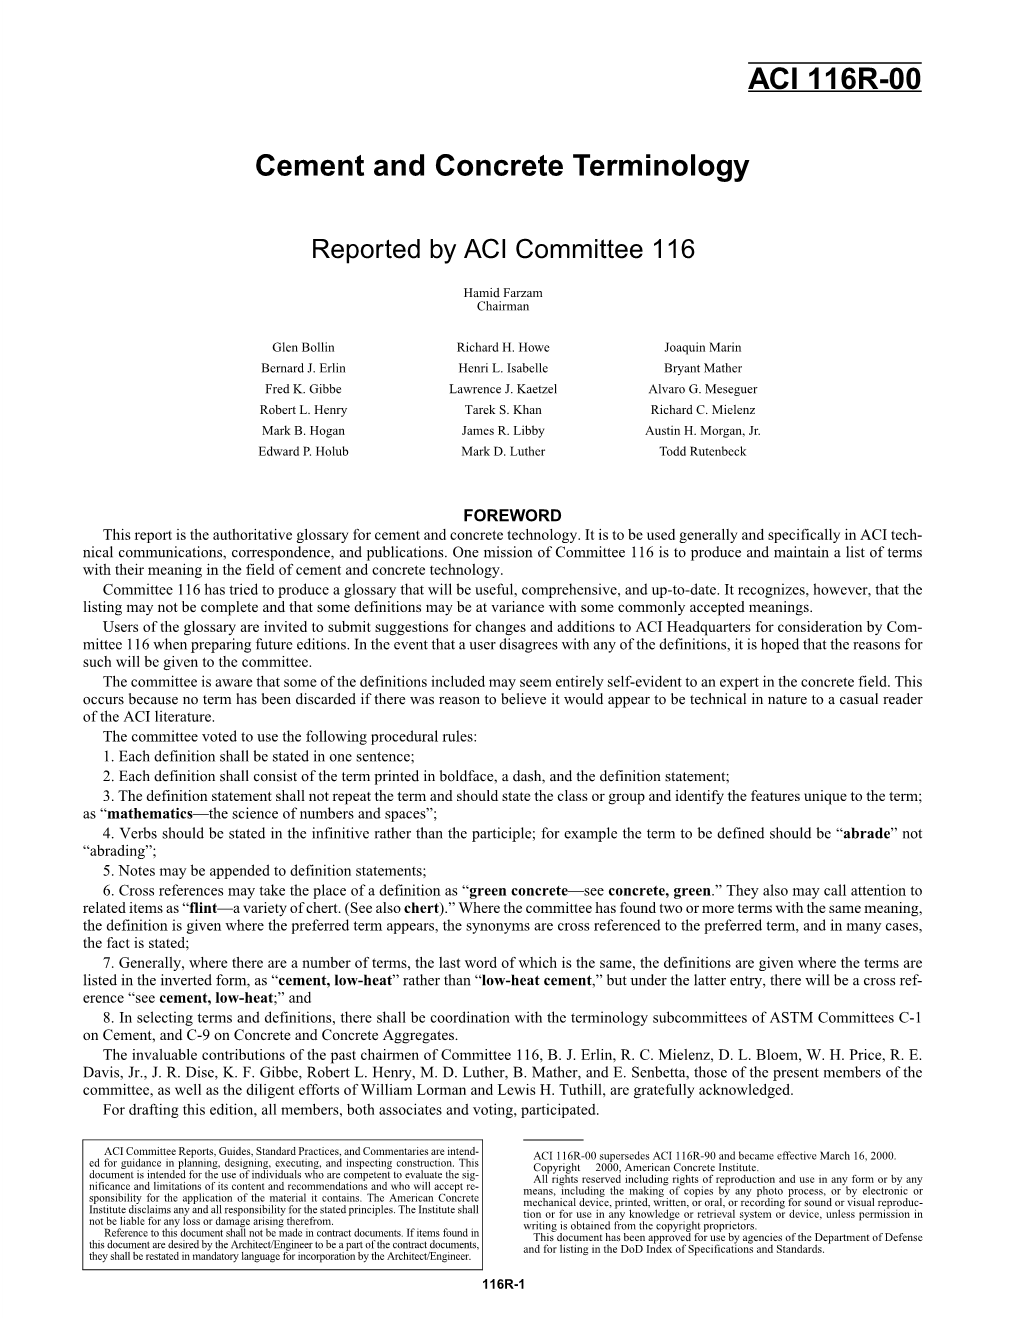 116R-00 Cement and Concrete Terminology